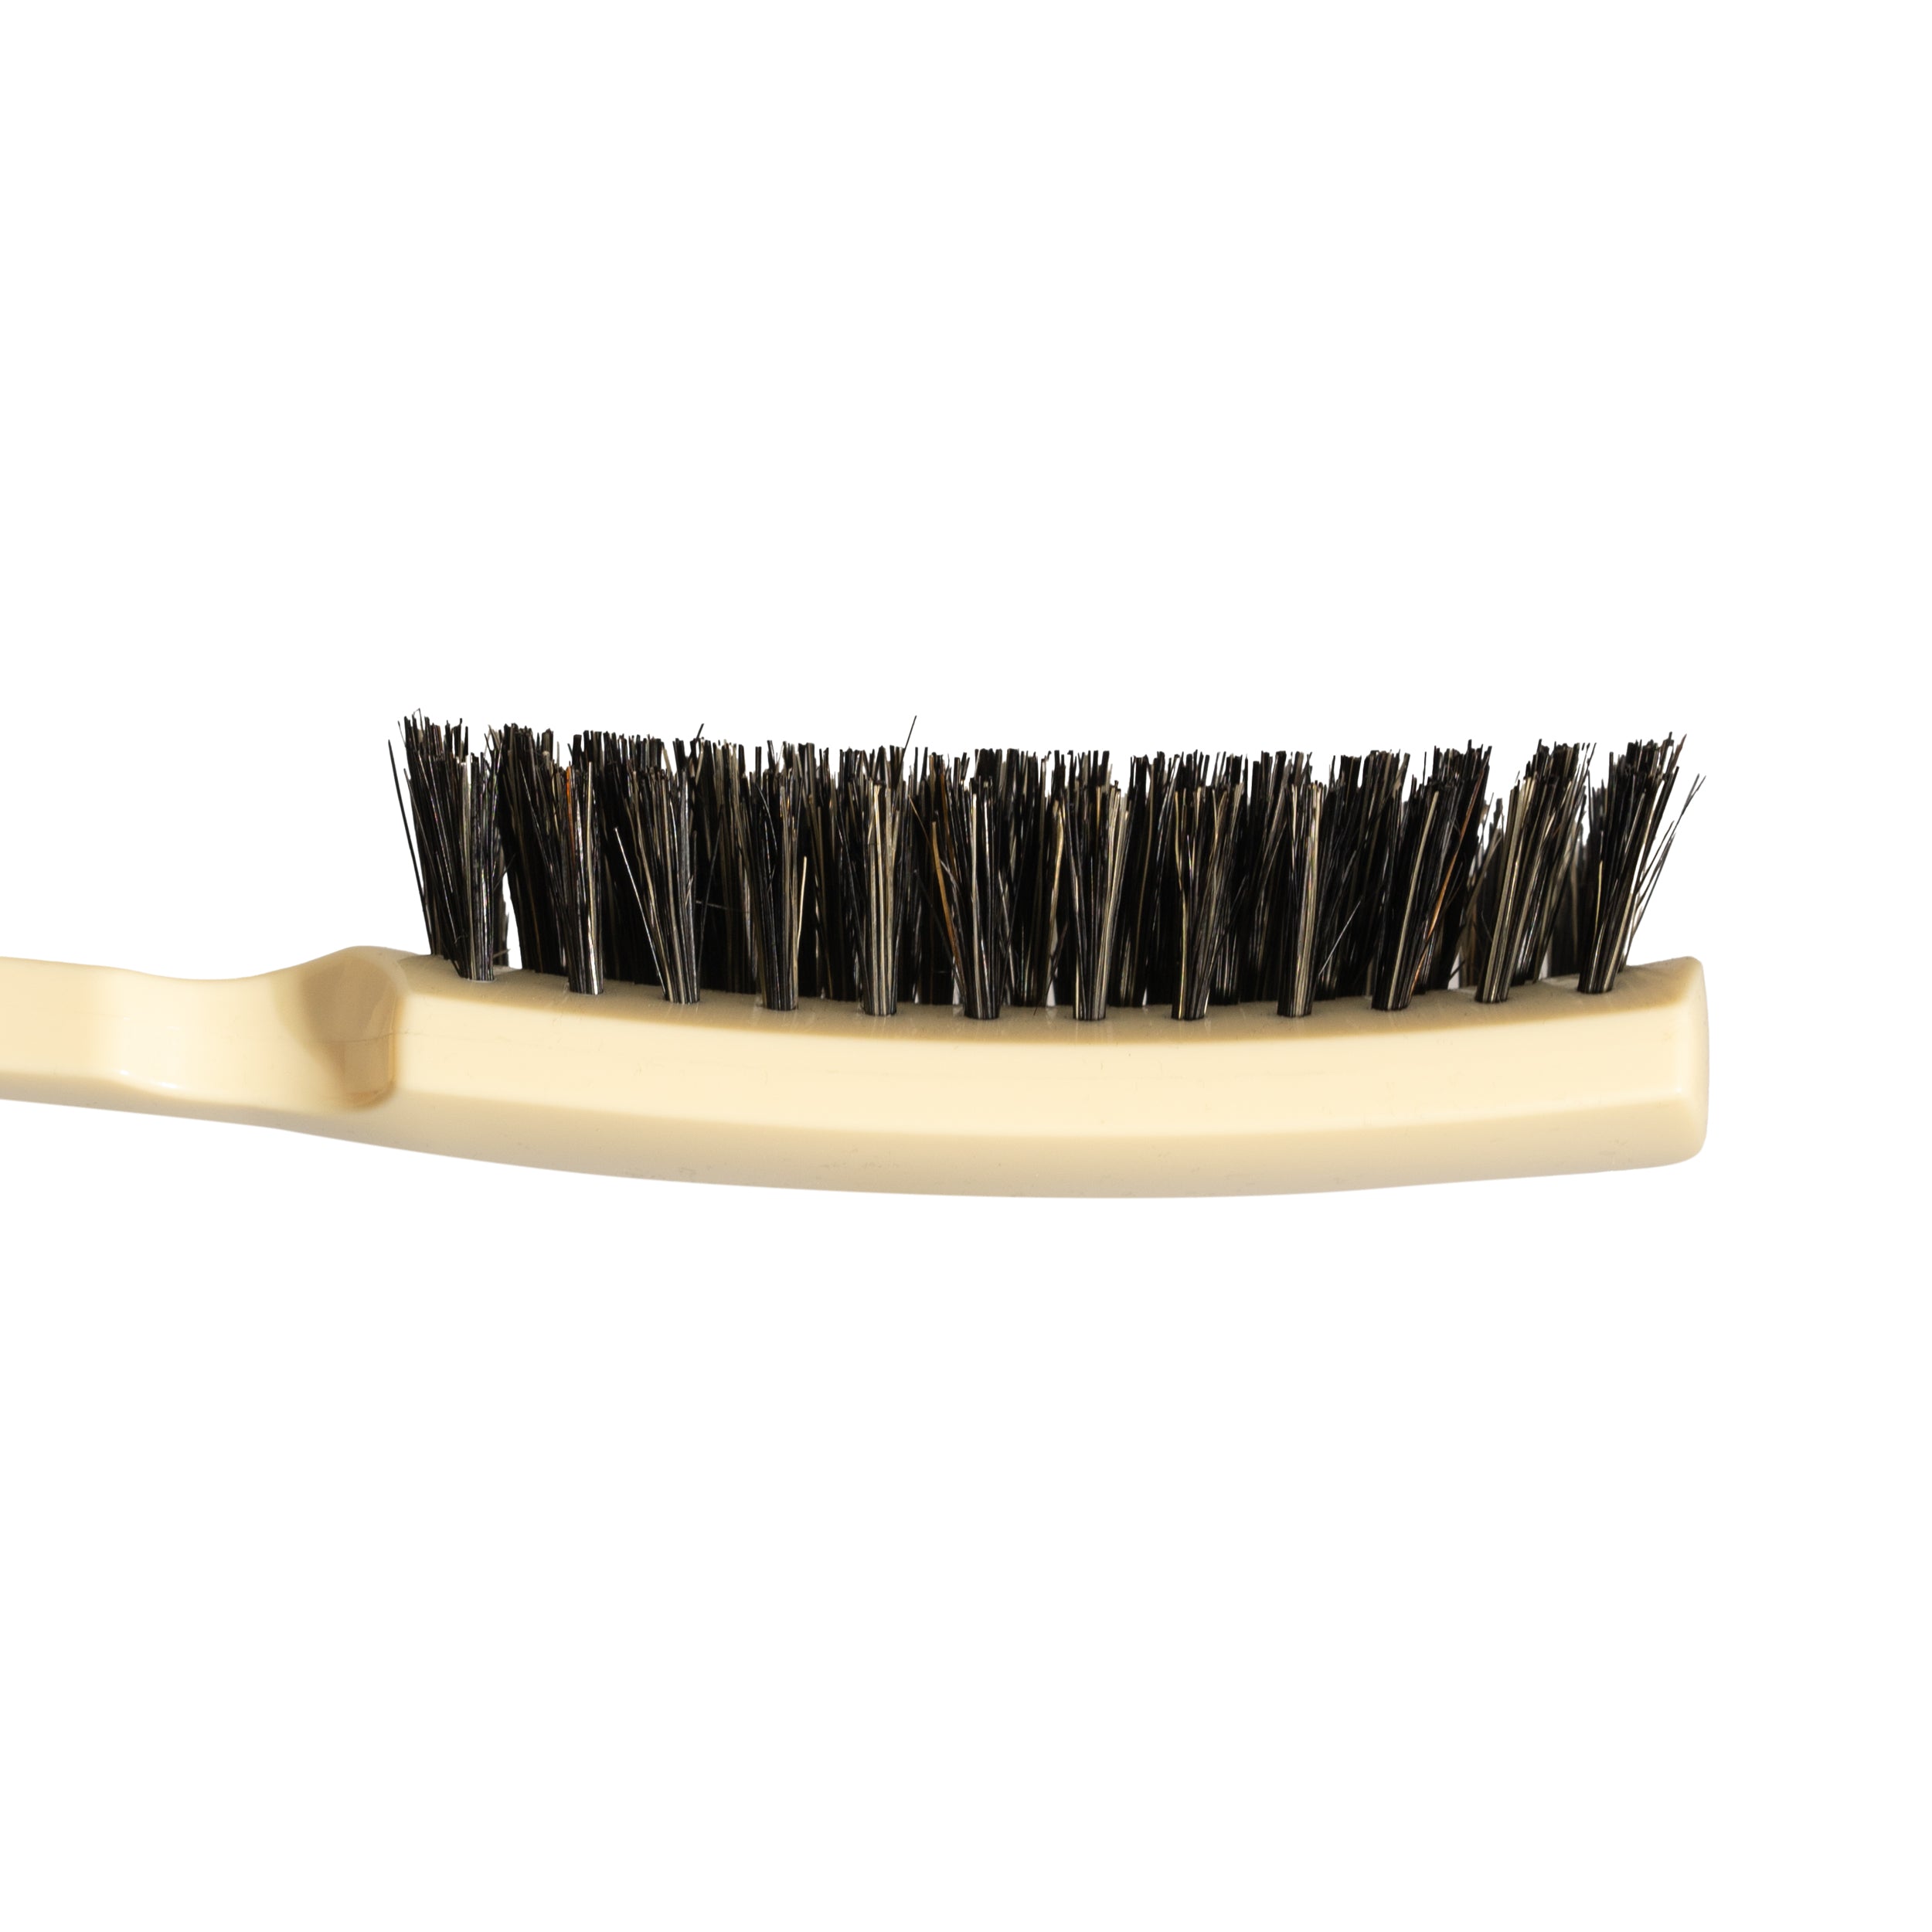 Nylon and Boar Bristle Professional Styling Hairbrush for all hair typ -  Hair Brushes — Fuller Brush Company